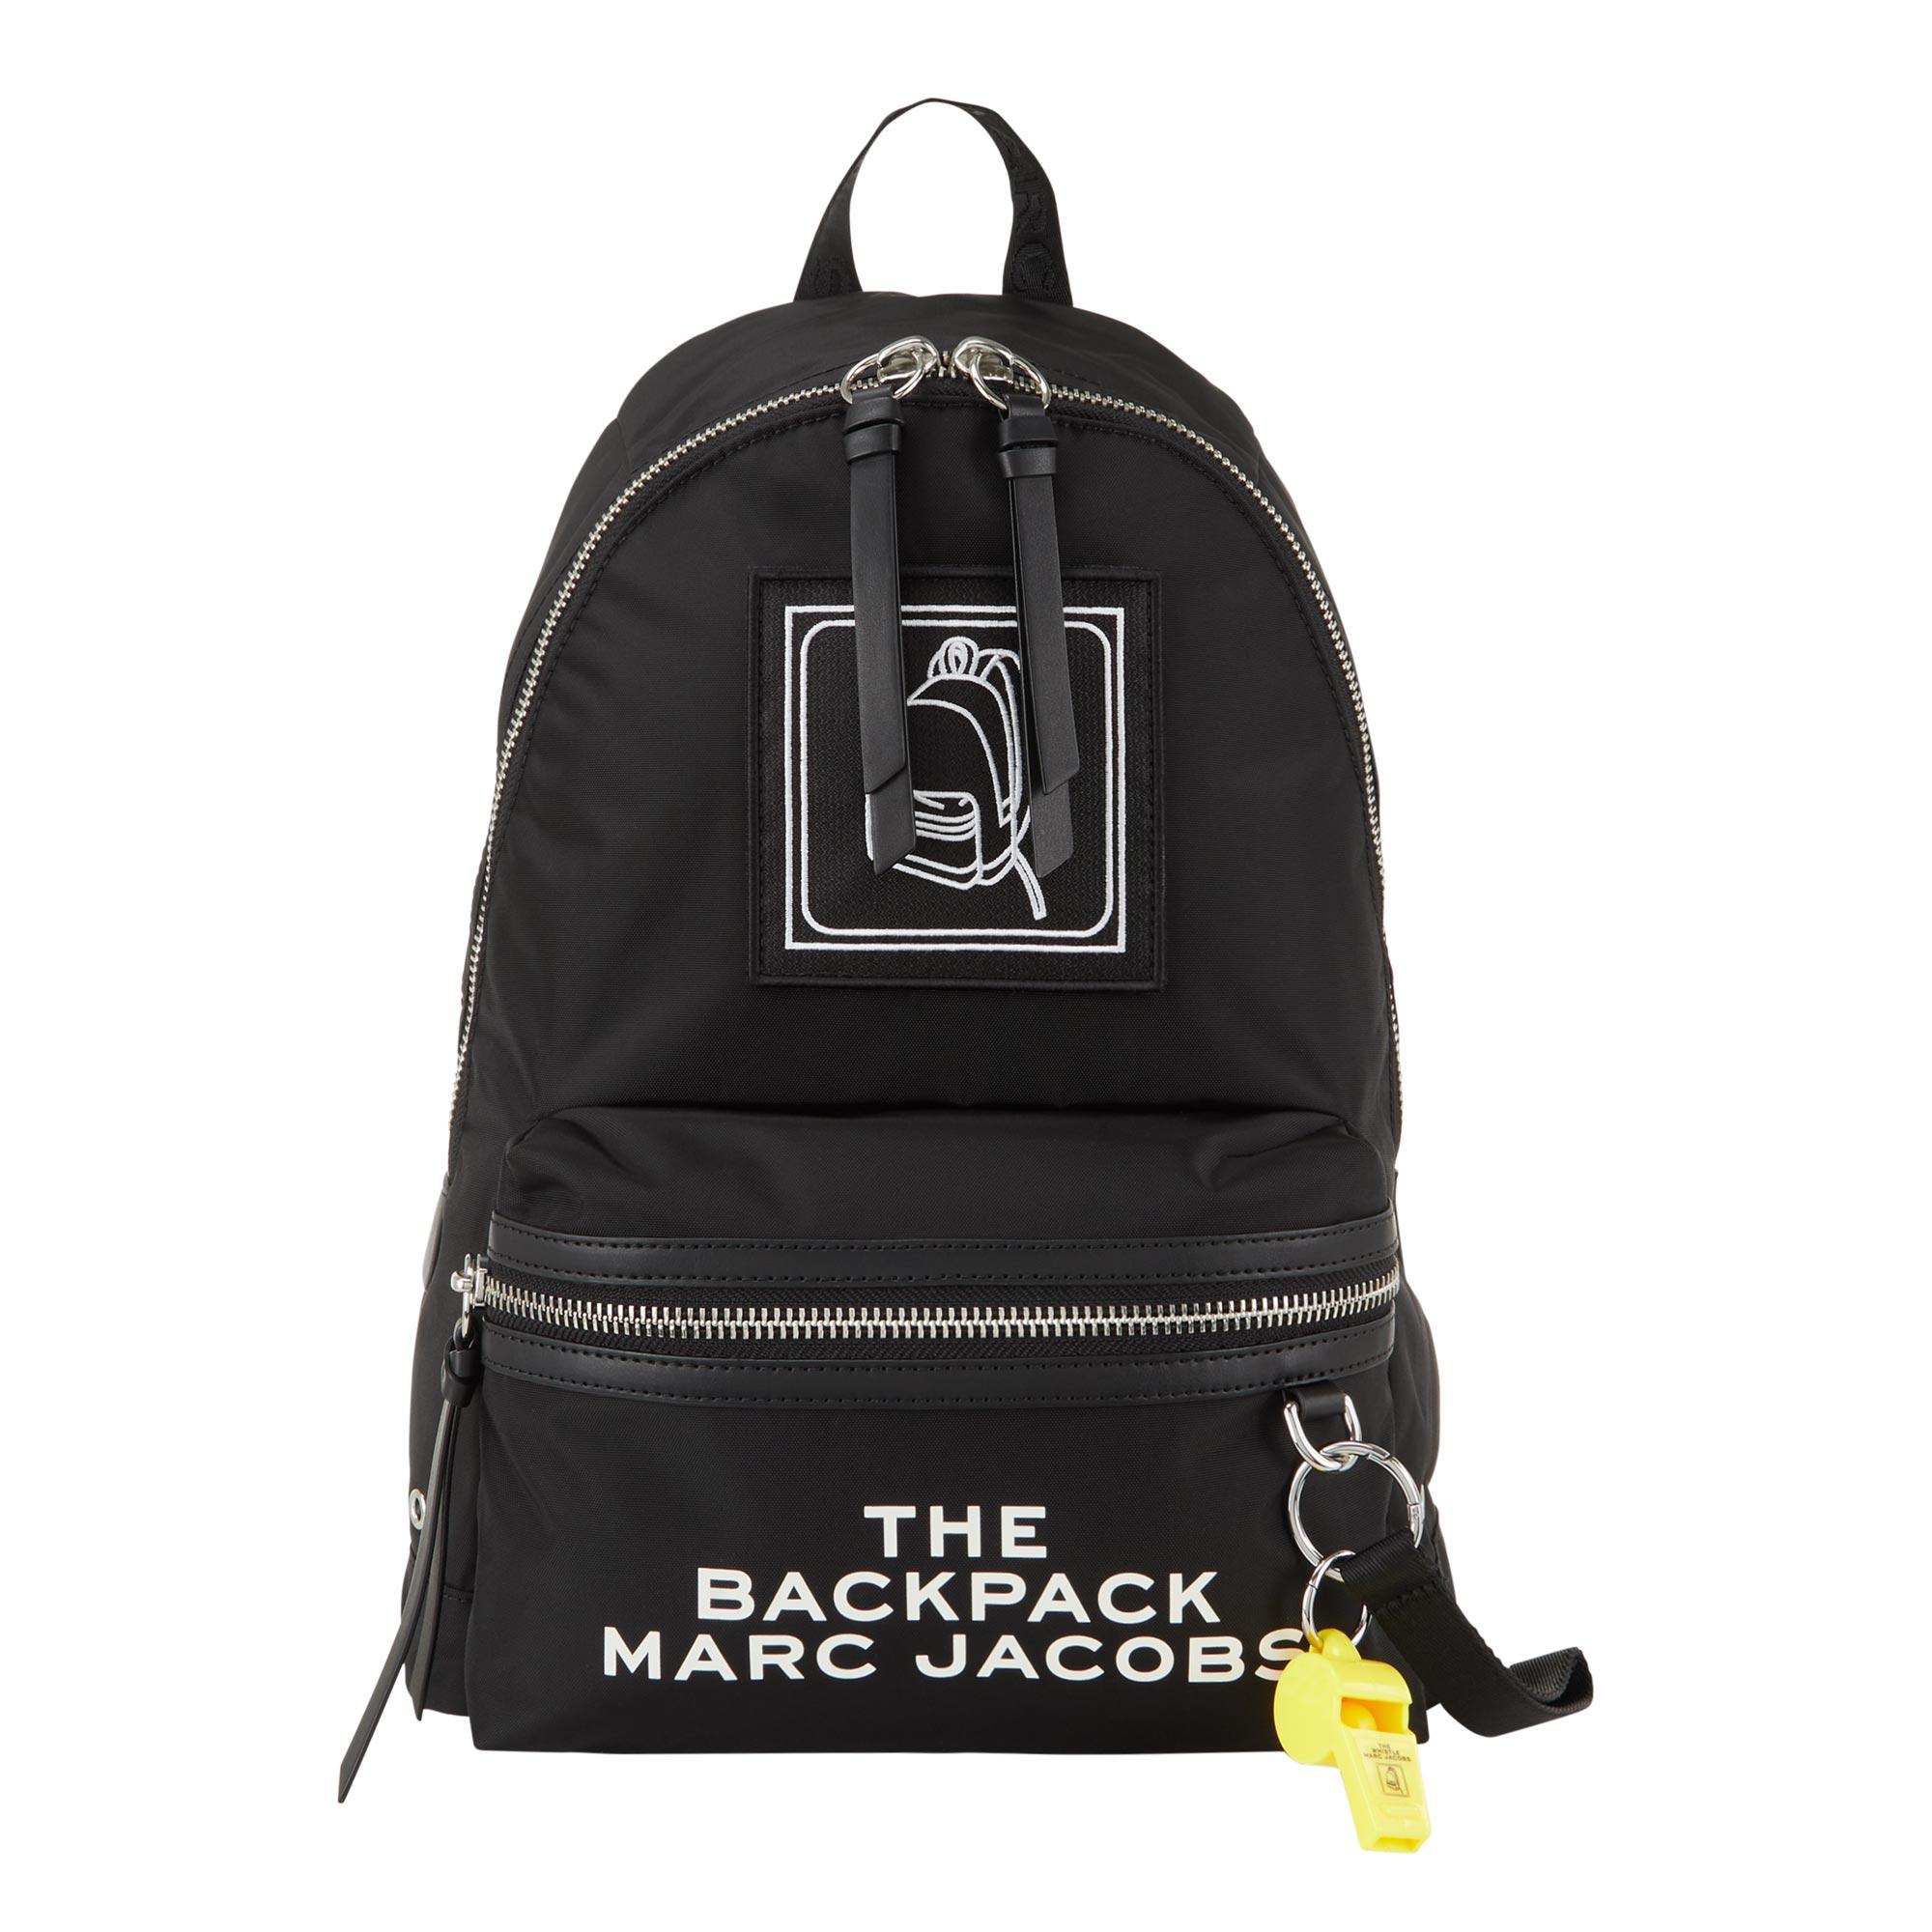 The Pictogram Backpack